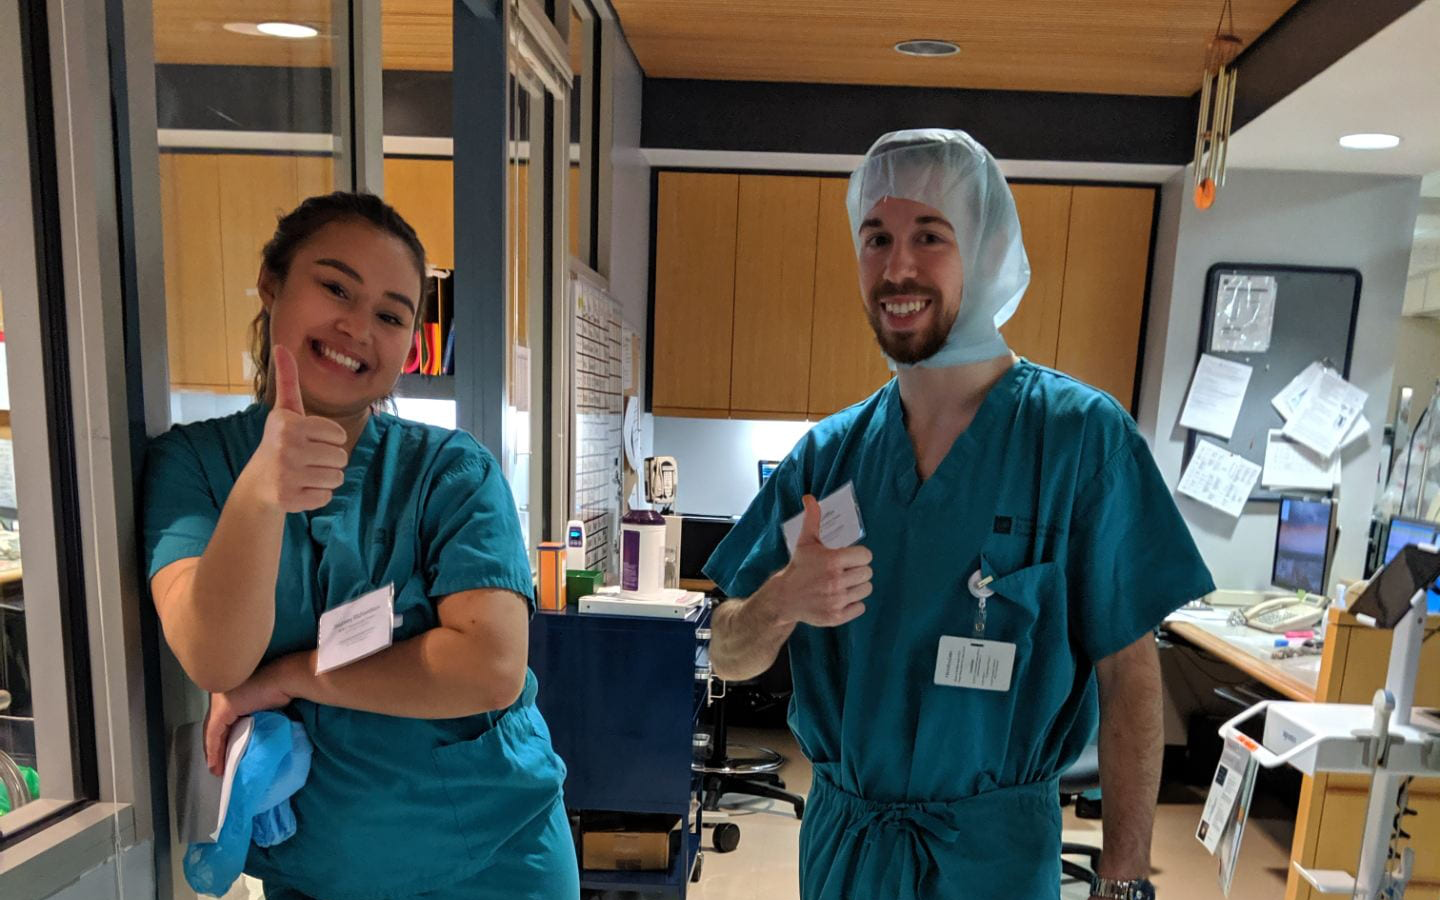 Students Journey and Kyle are wearing teal scrubs and giving the camera a thumbs up. They are in a medical setting at their behavioral neuroscience internship.